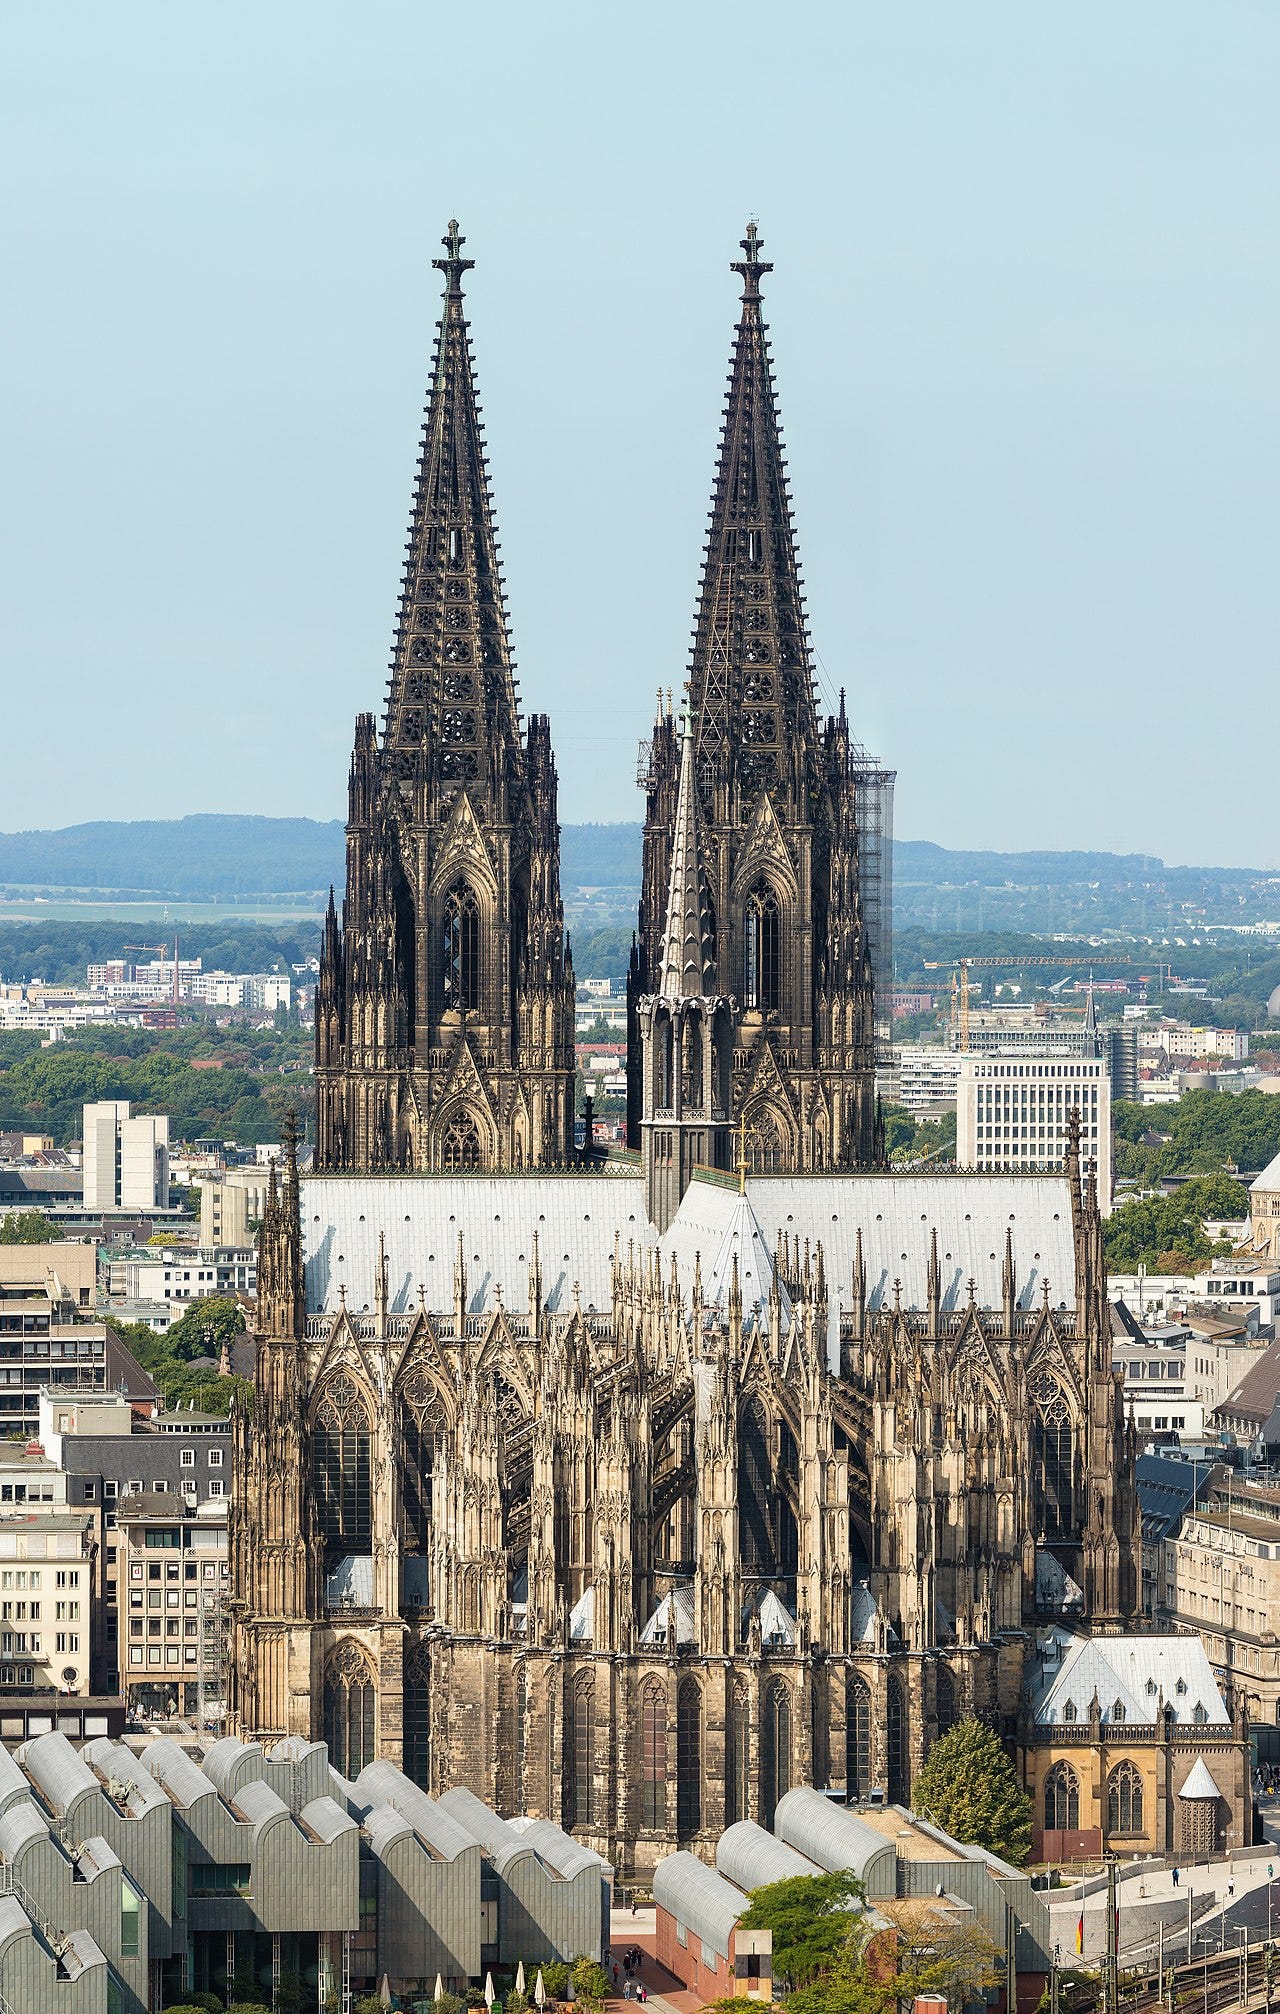 What Is Gothic Architecture?